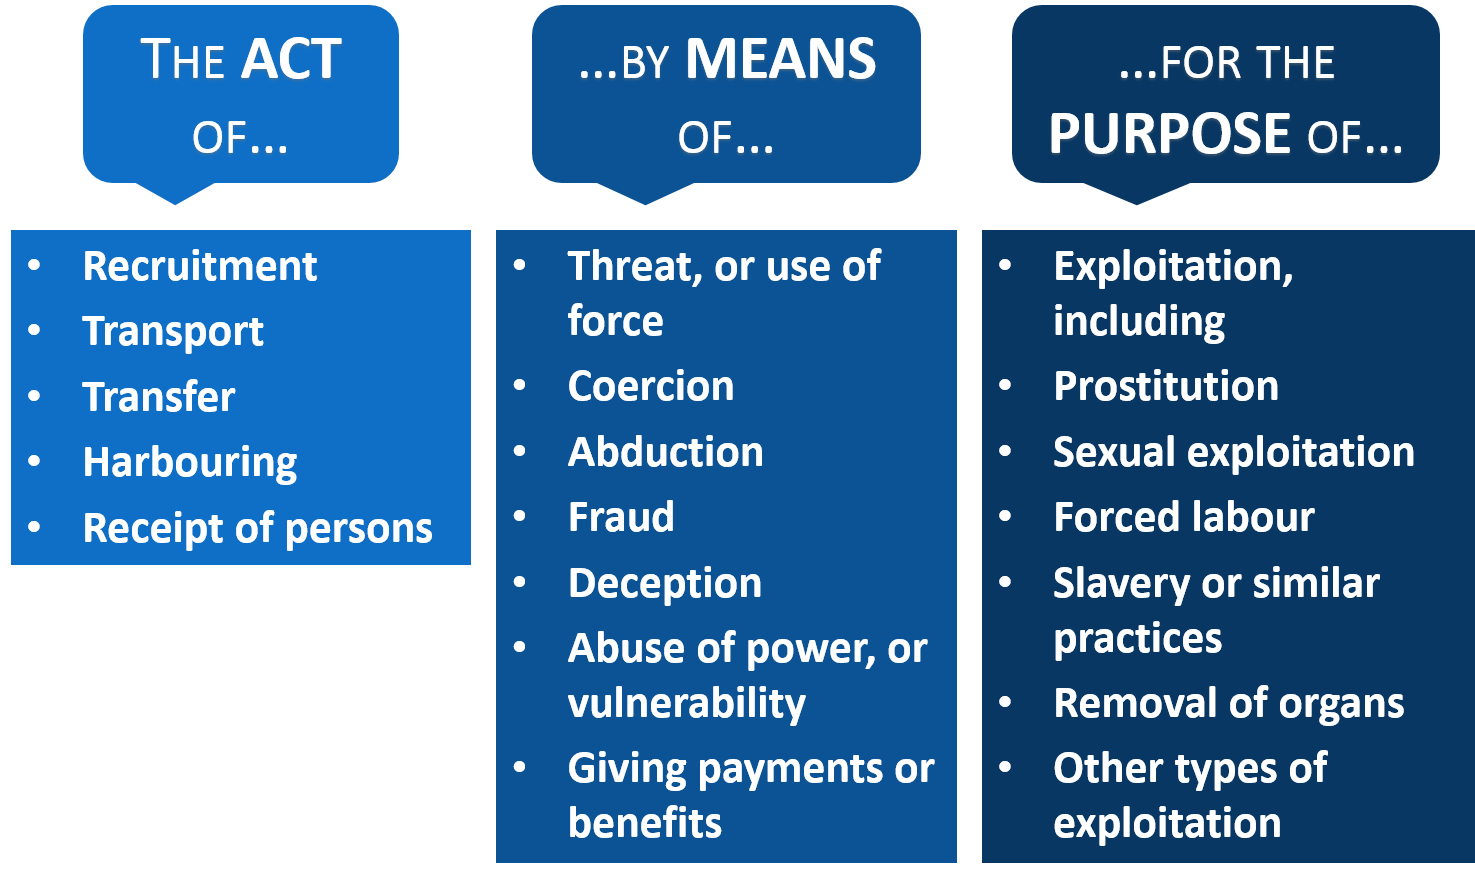 Human trafficing Act means purpose image